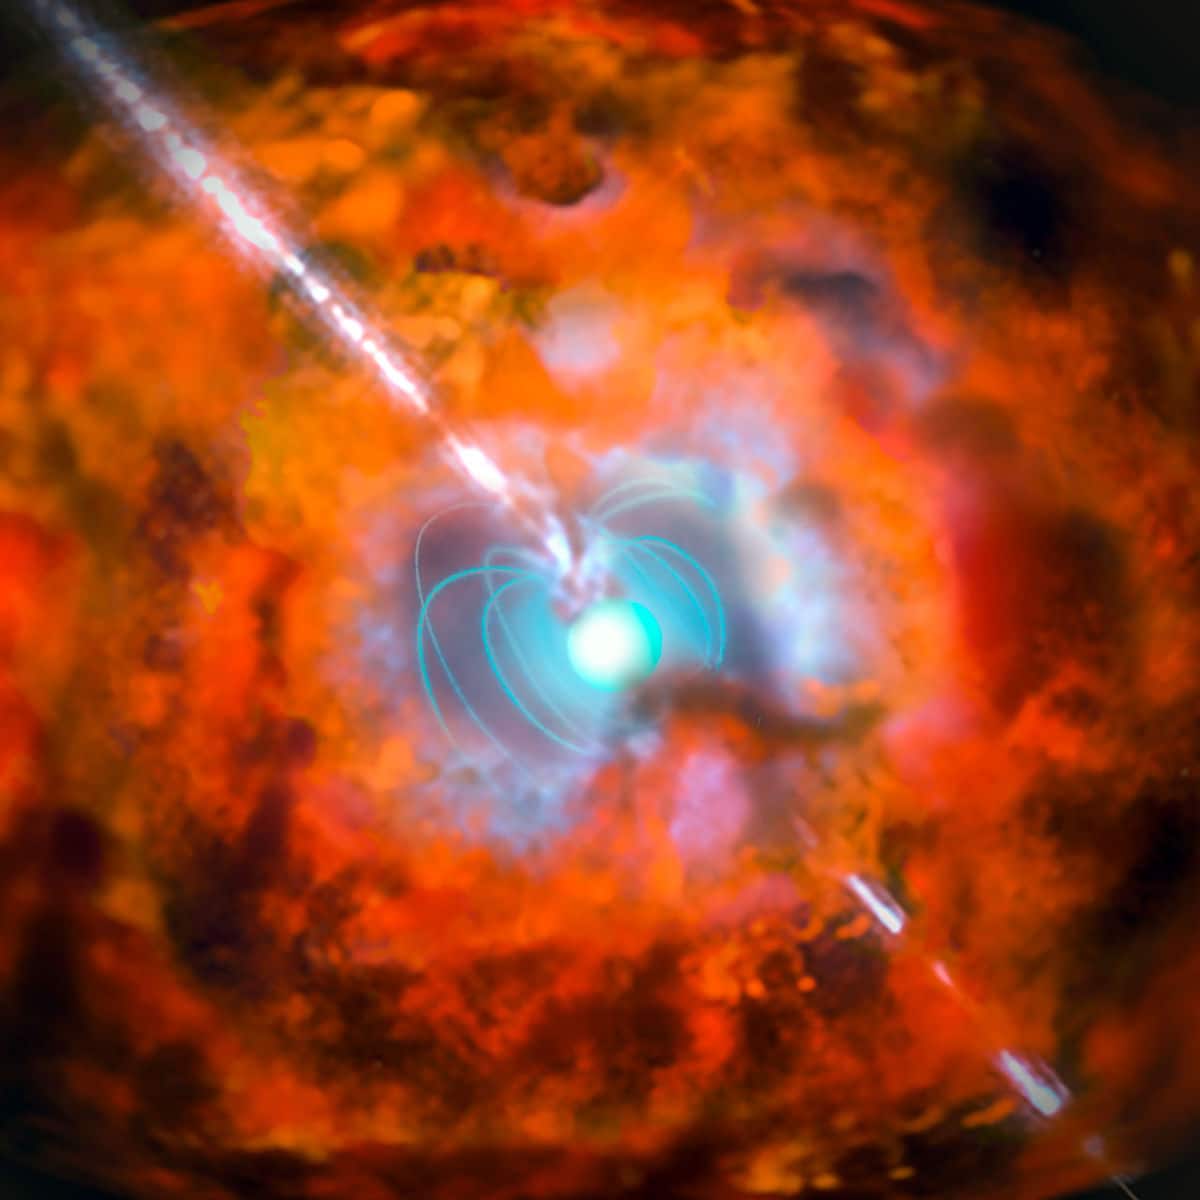 Artists impression of a gamma ray burst and supernova powered by a magnetar